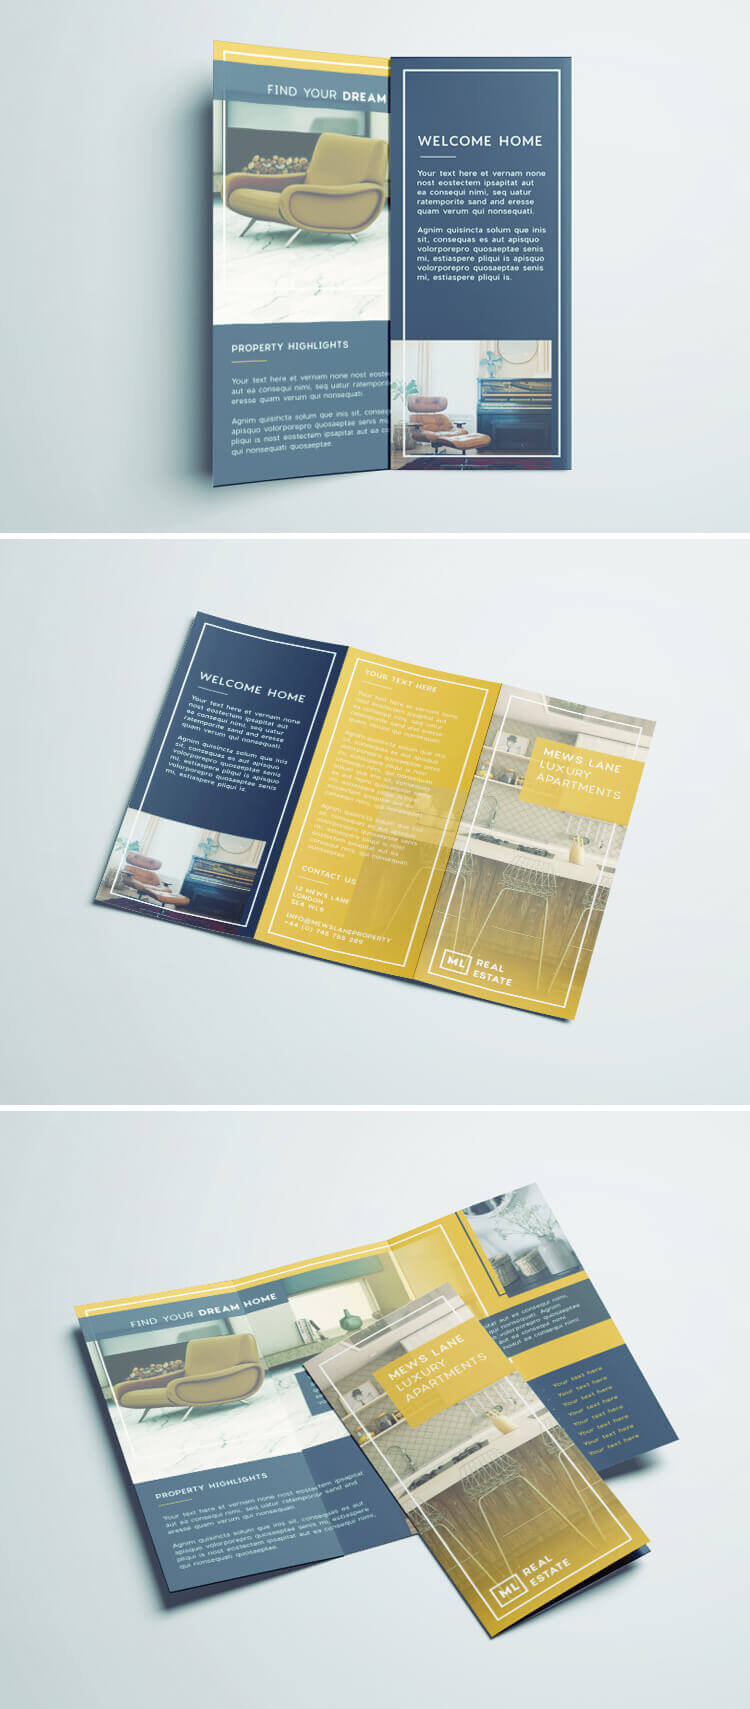 Tri Fold Brochure | Free Indesign Template For Adobe Indesign Tri Fold Brochure Template